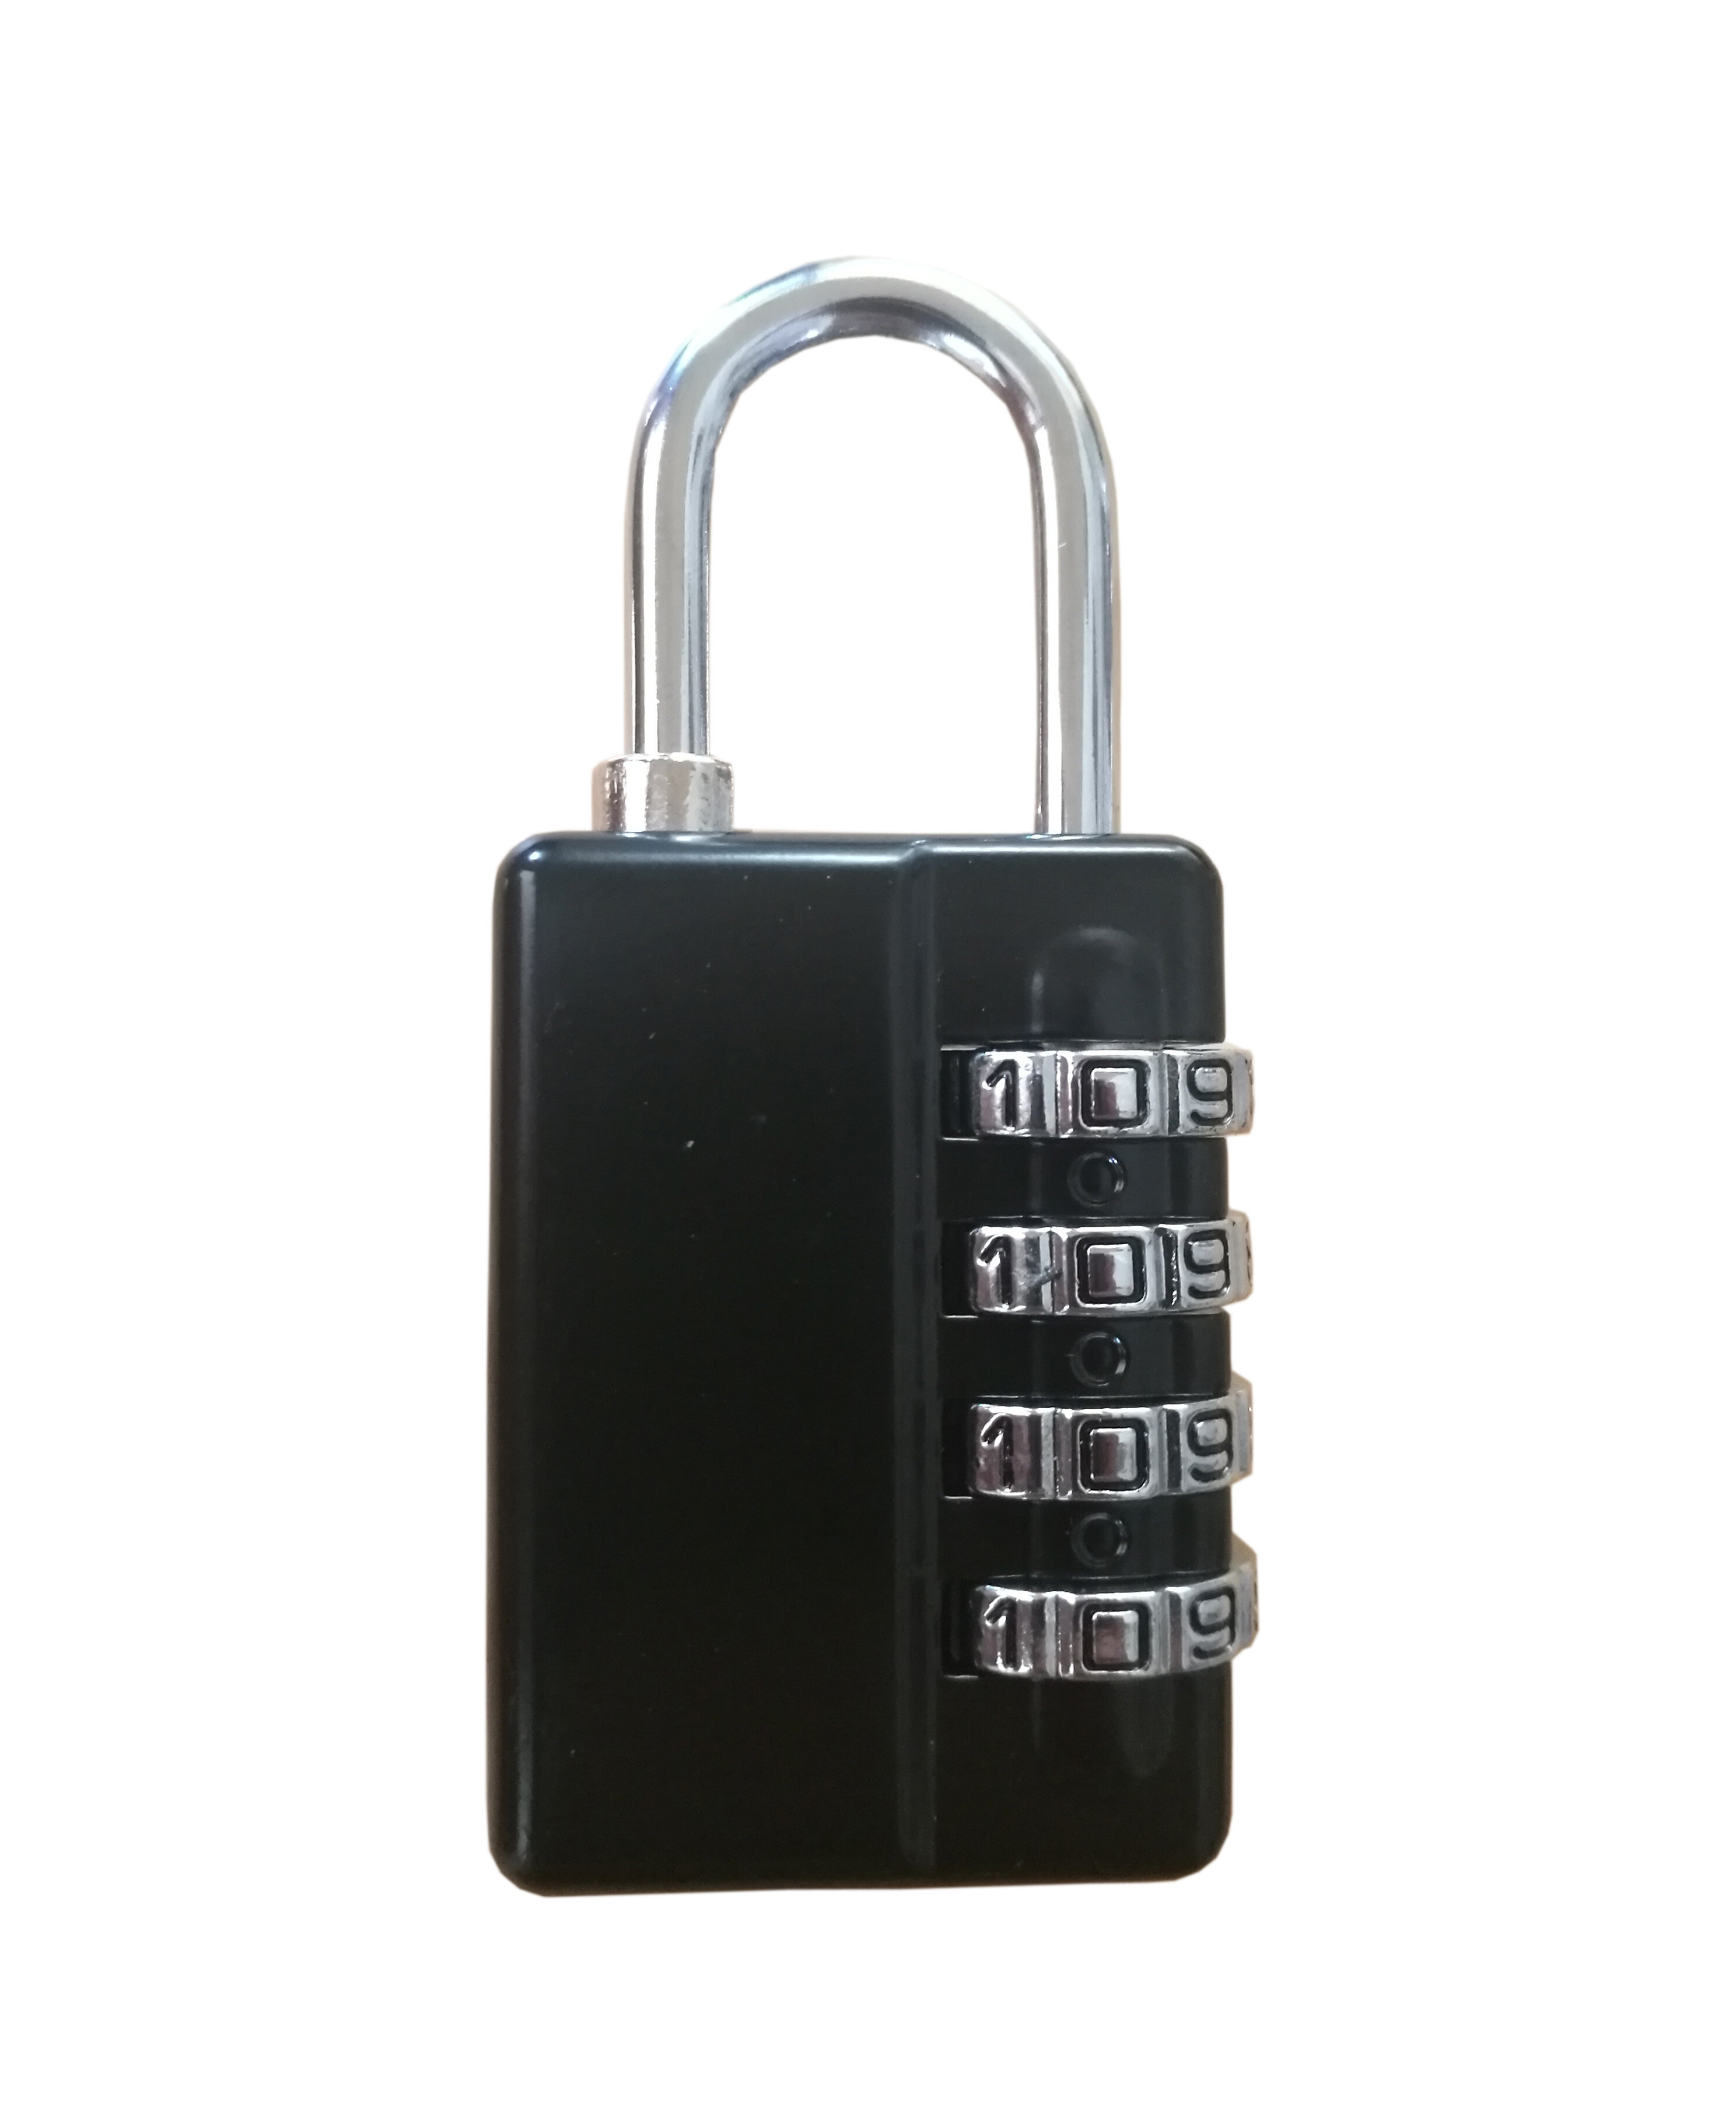 Master Lock Resettable Combination Locker Lock, Lock for Gym and School  Lockers, Colors May Vary